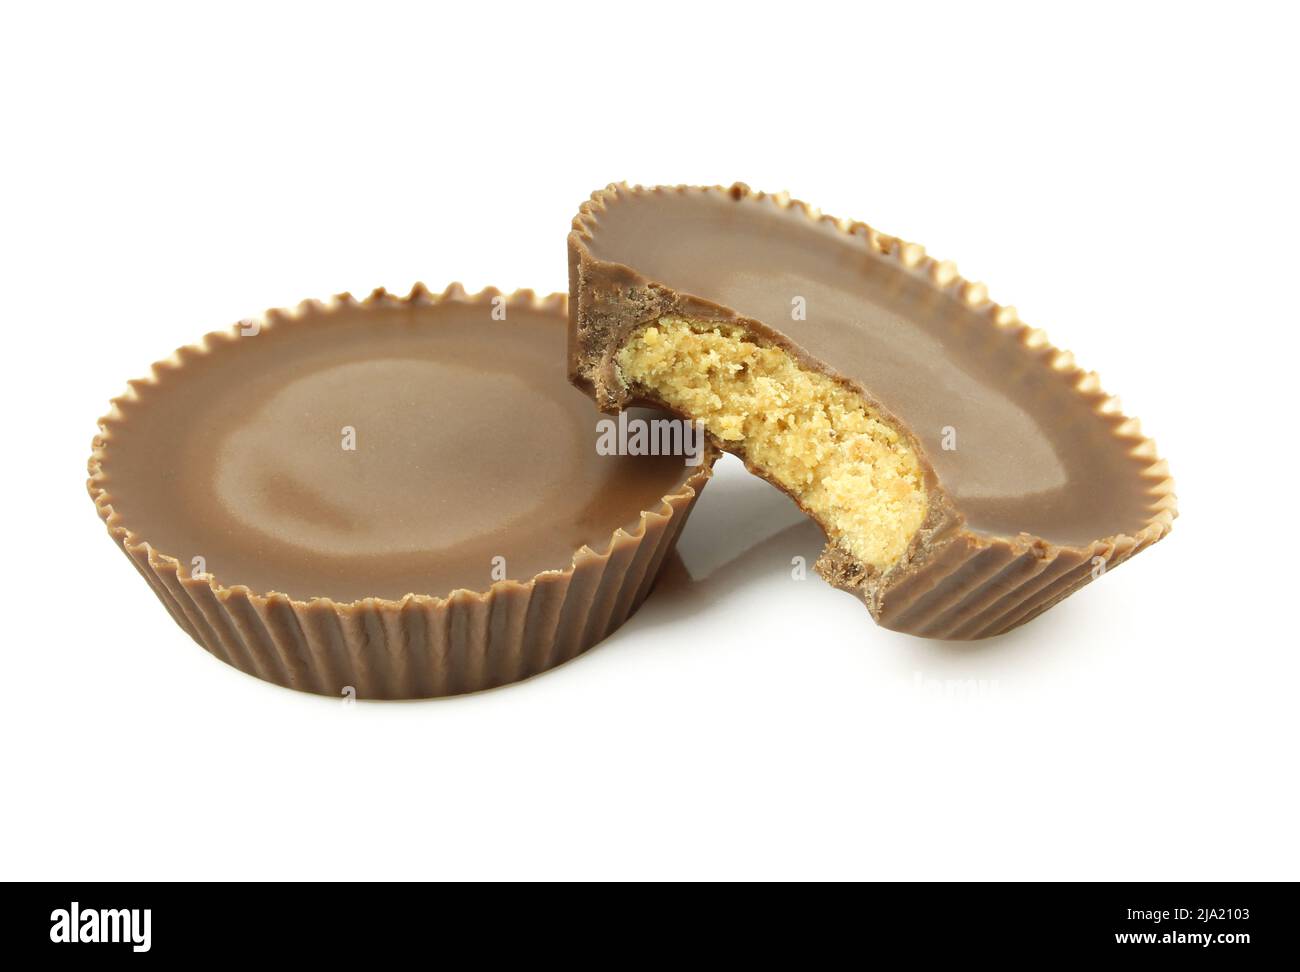 Short cupcake shaped sweets with peanut filling and chocolate cover. Bitten and isolated on white background Stock Photo